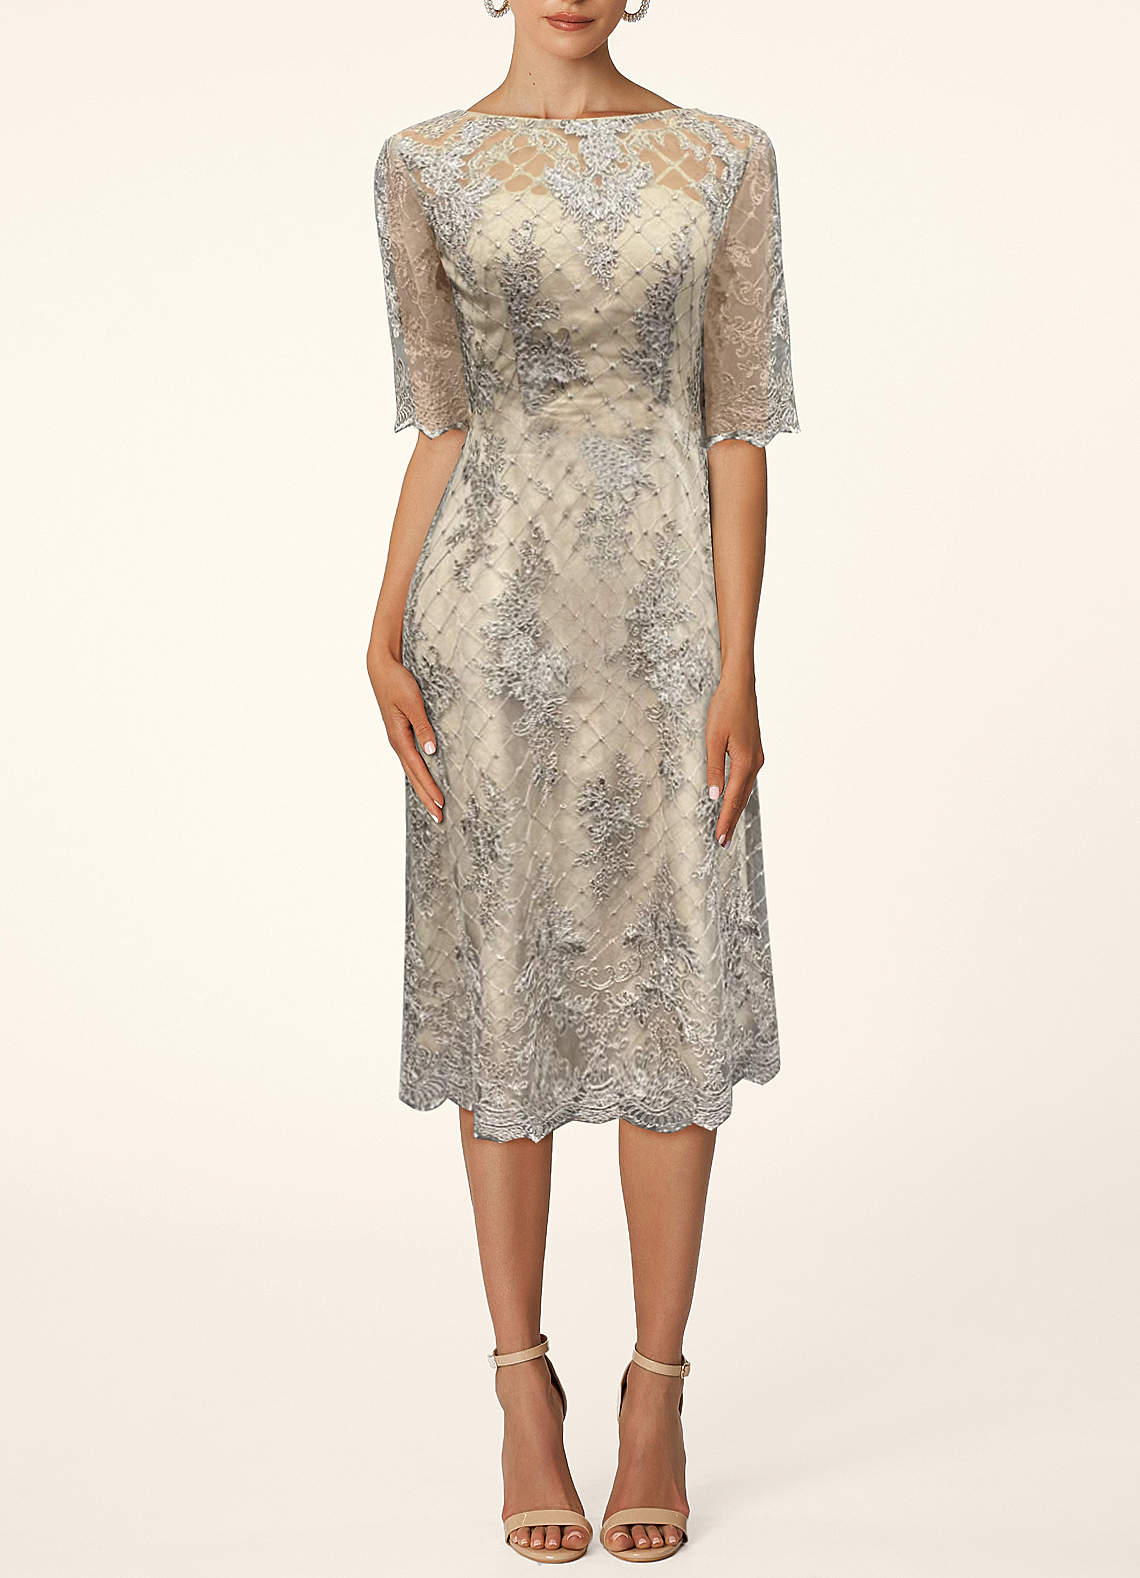 Upstudio Embroidered Lace Tea-length Dress Mother of the Bride ...